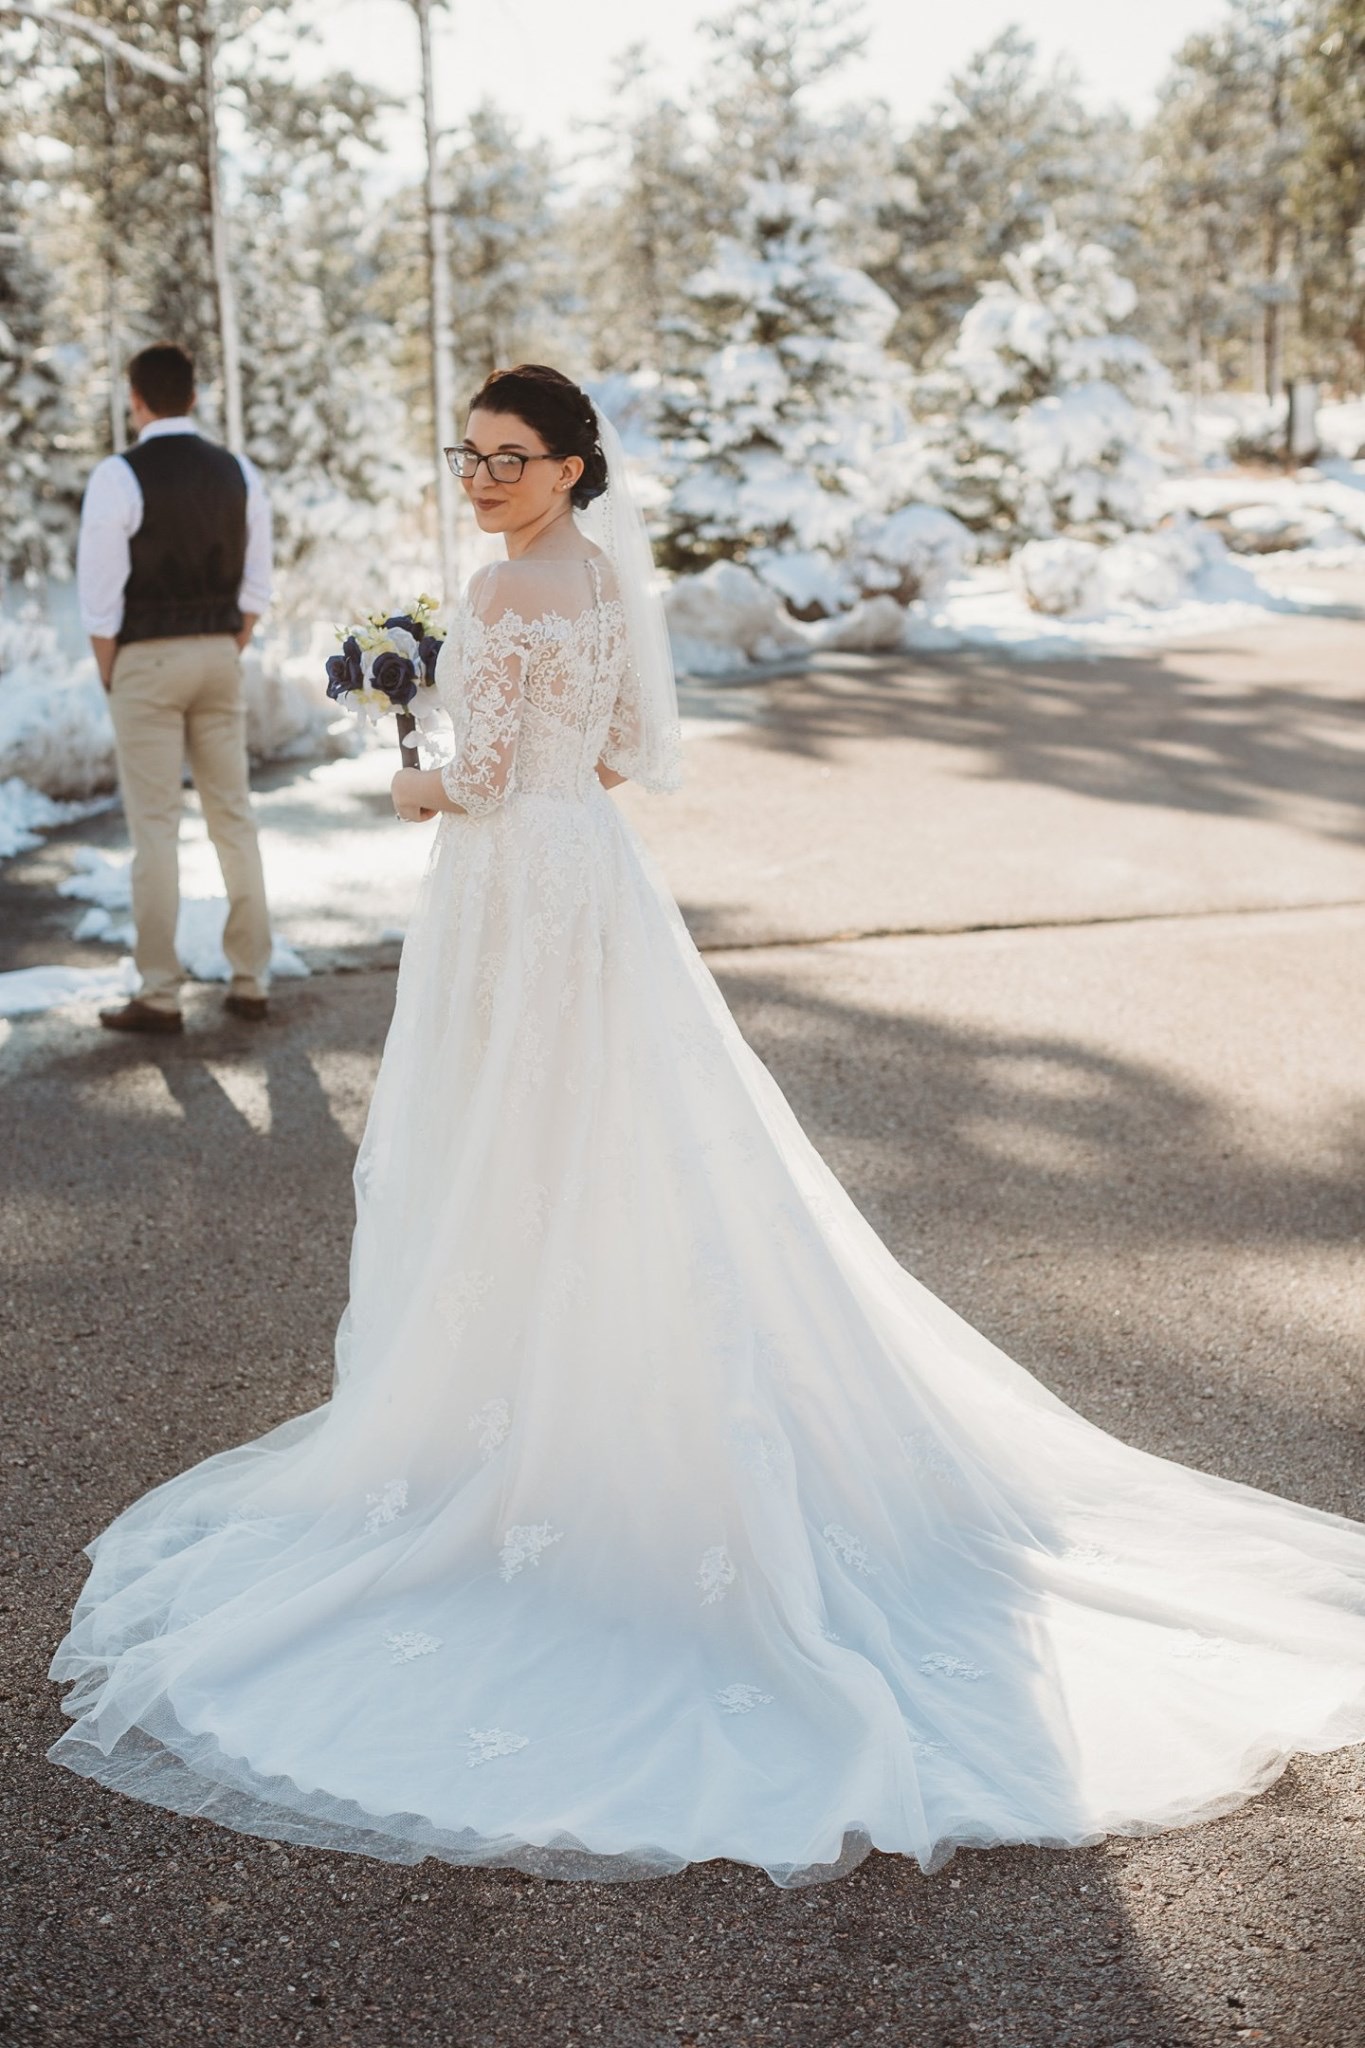 Real Bride Wearing Off-the-Shoulder Lace Wedding Dress Called Bree by Maggie Sottero